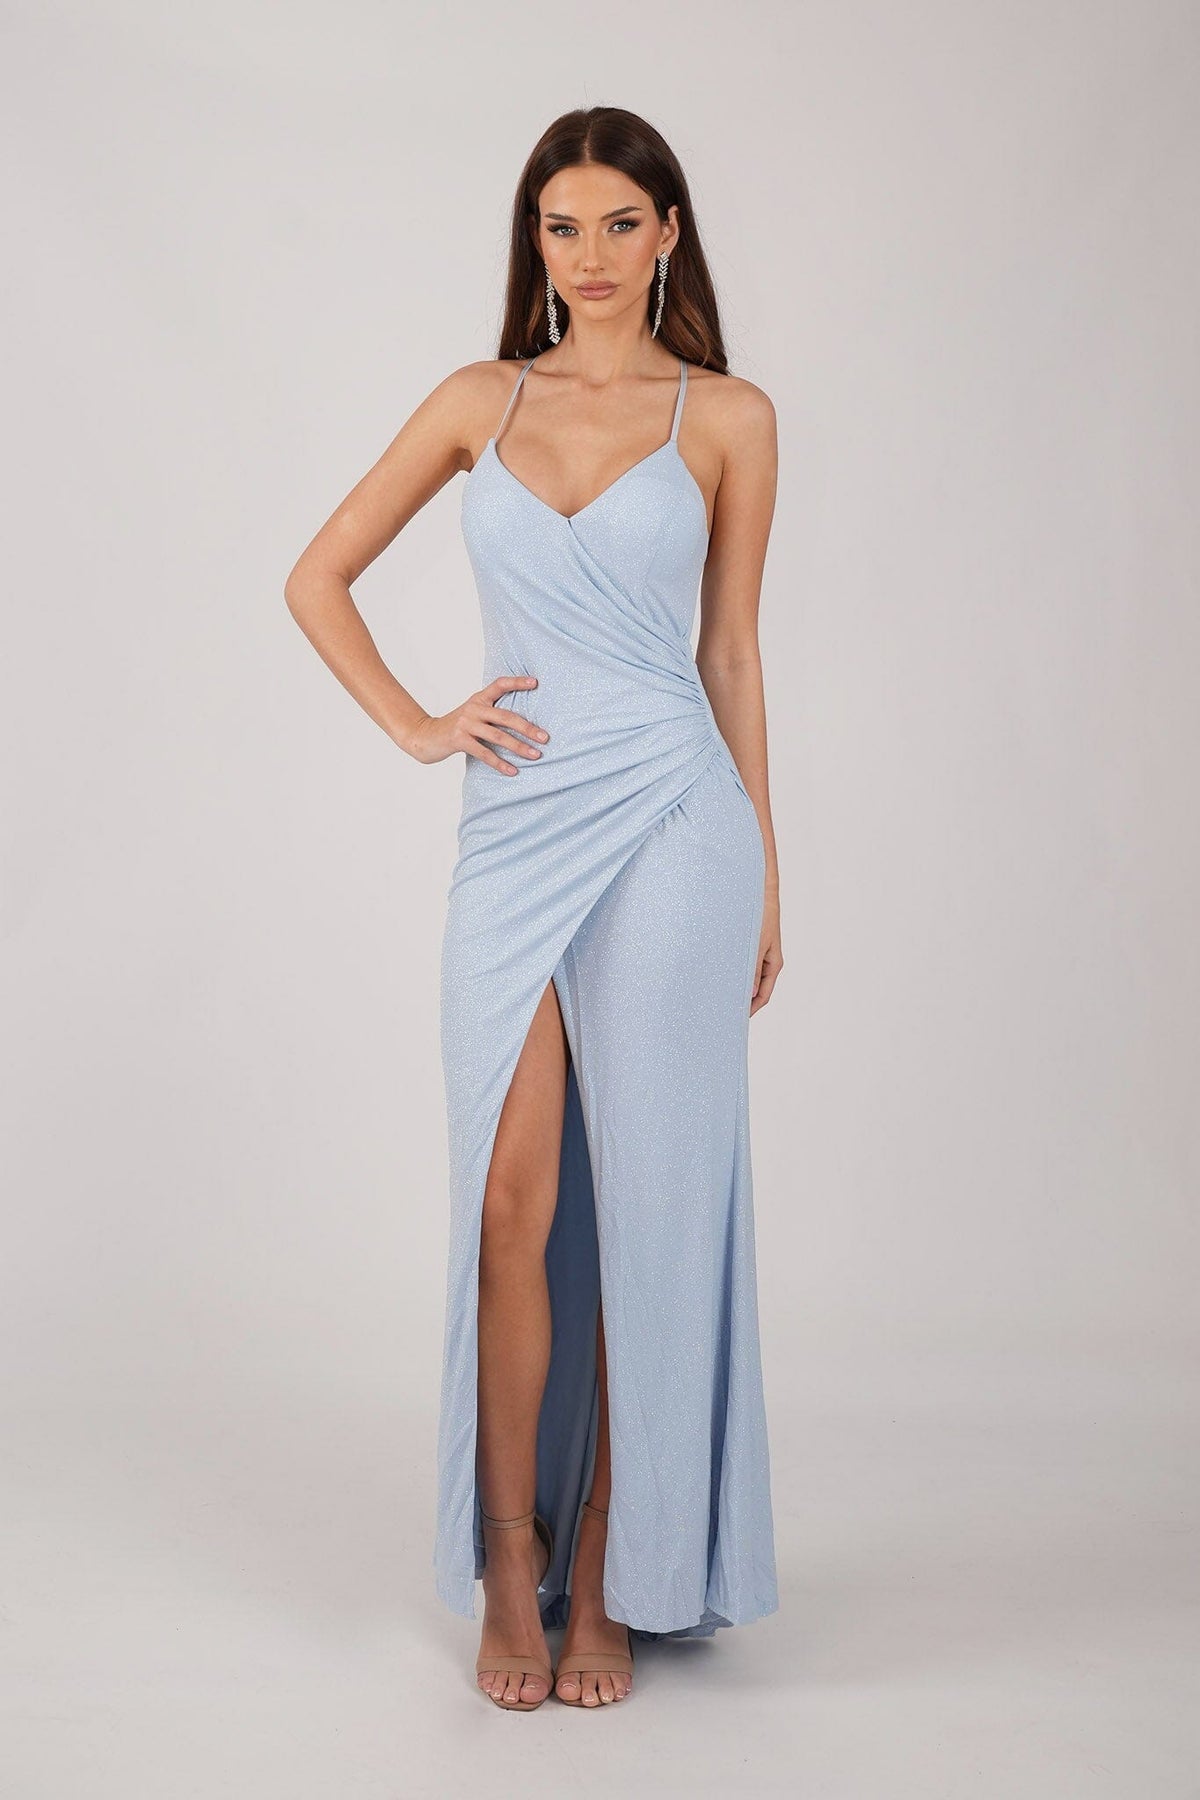 Light Blue Shimmer Fitted Maxi Dress with Thin Shoulder Straps, Gathered Detail at Waist and Leg Slit